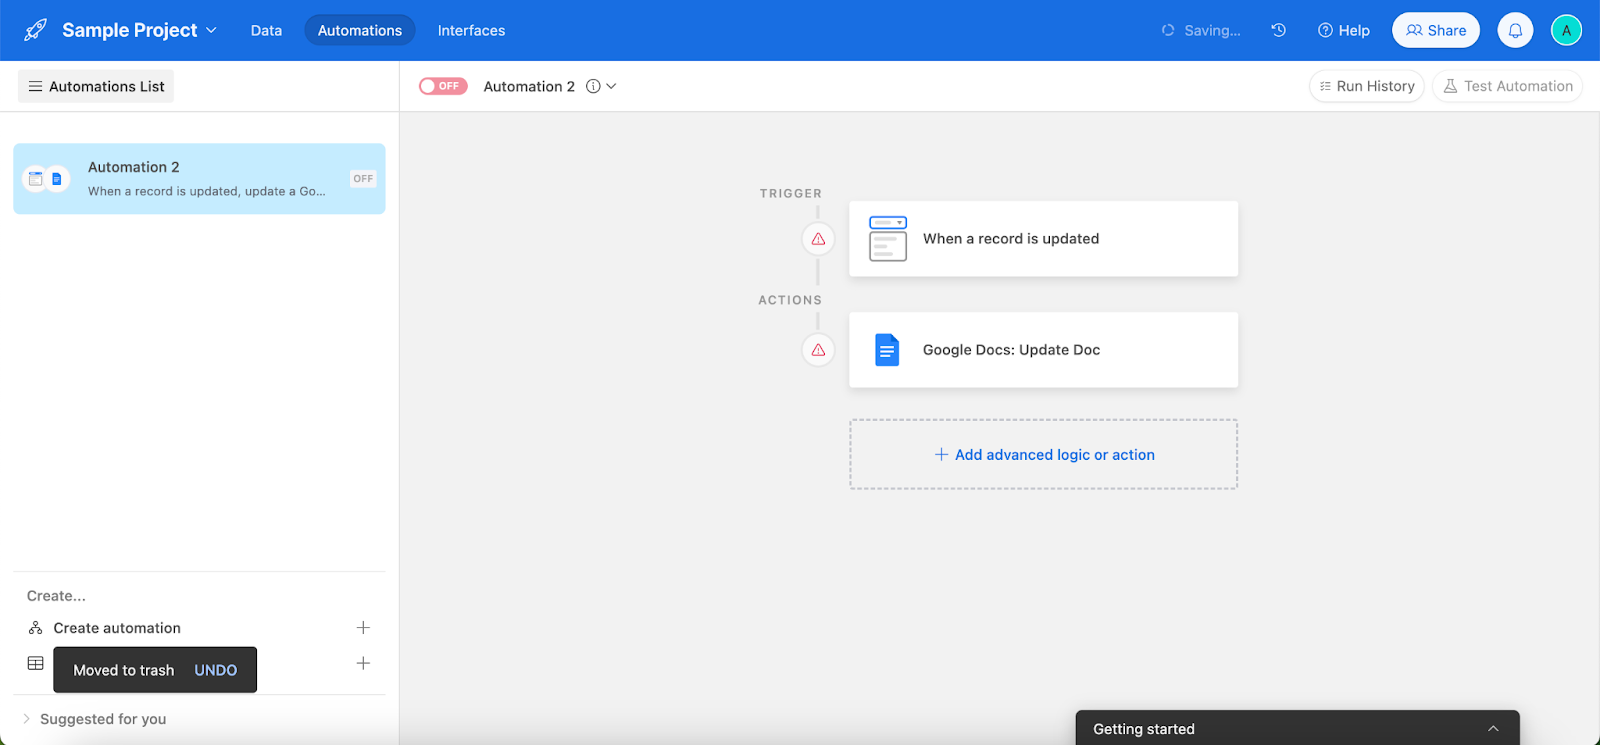 Google Docs integrations - Automating Google Docs updation in Airtable